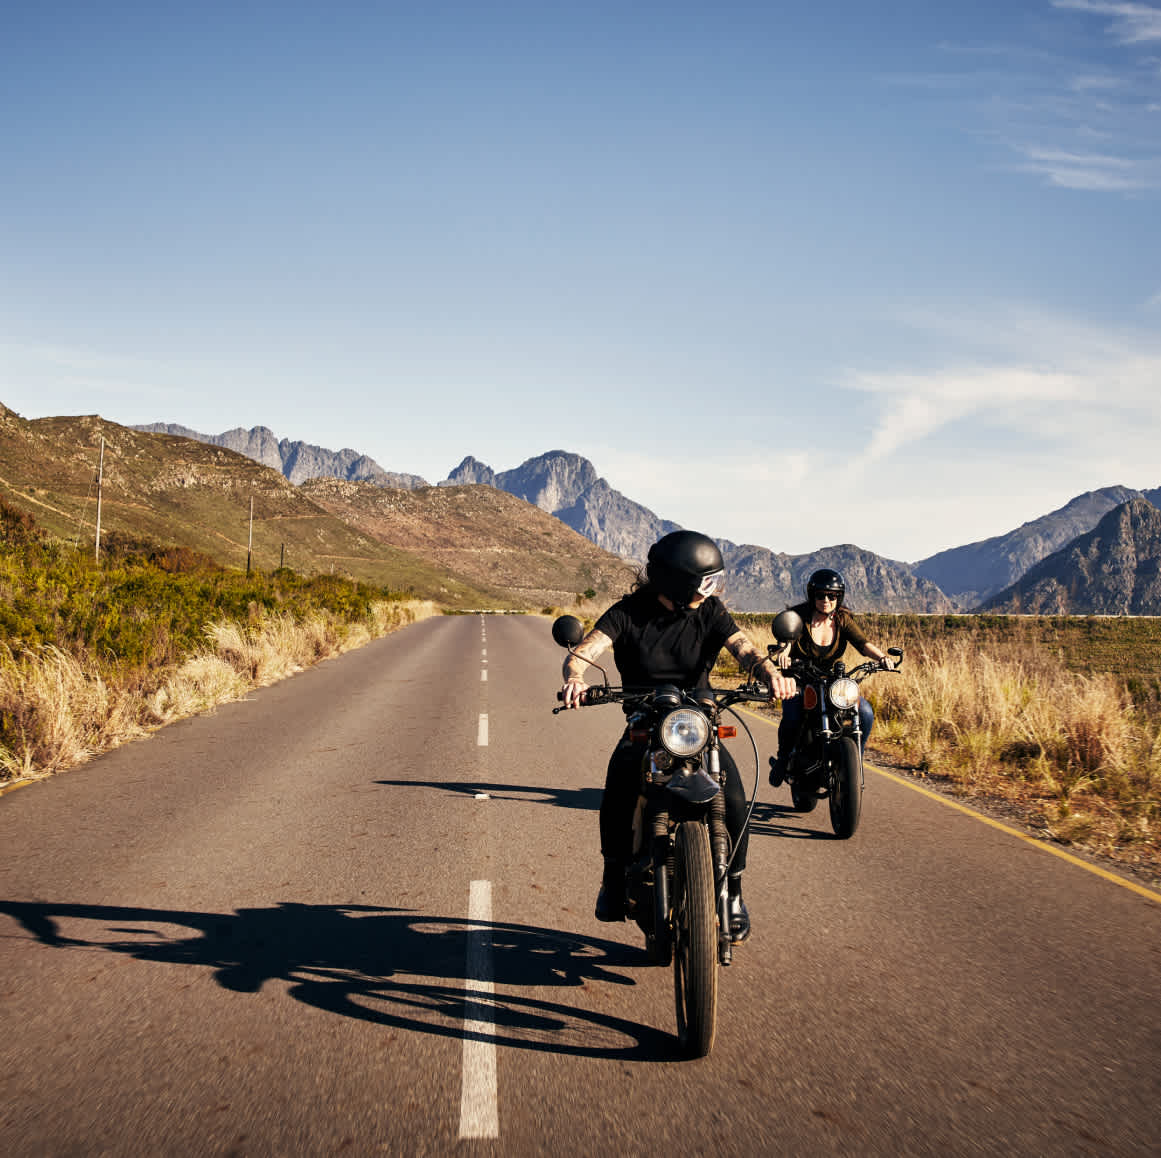 2 people on motorcycles driving on a road through mountains 